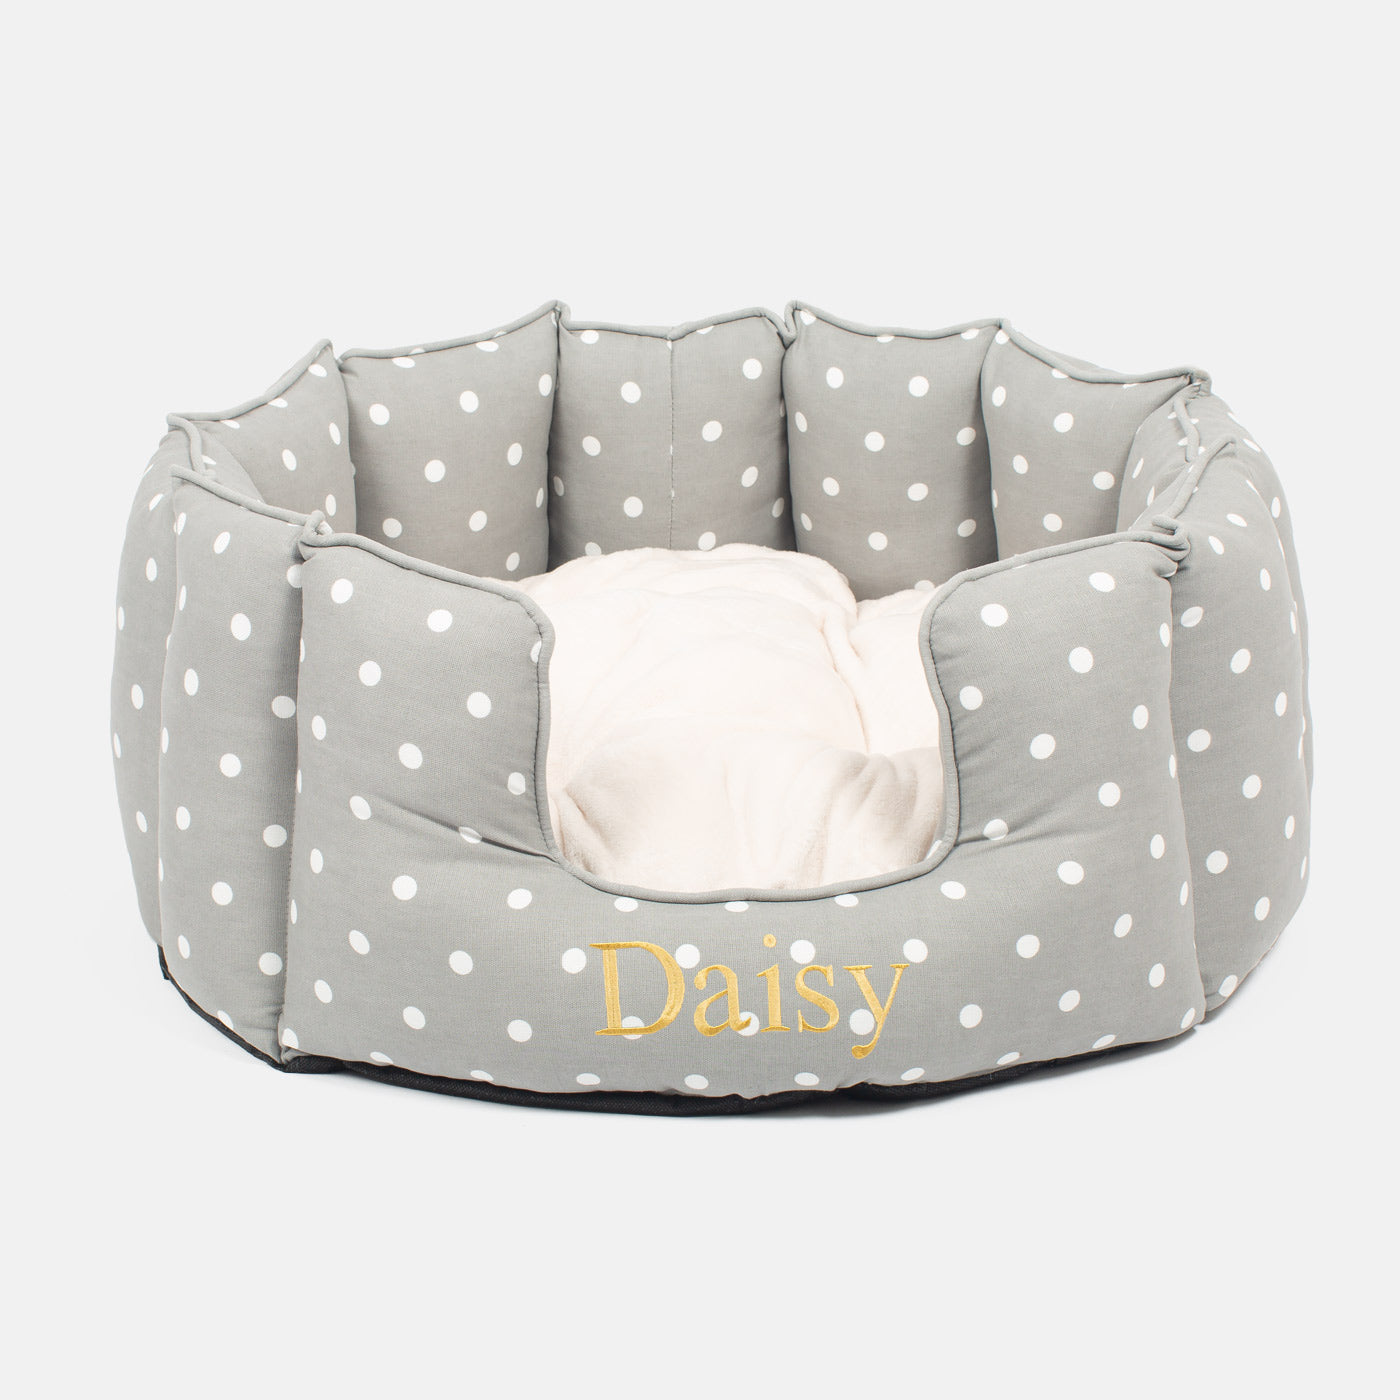 Discover Our Luxurious High Wall Bed For Dogs & Puppies, Featuring Reversible Inner Cushion With Teddy Fleece To Craft The Perfect Dog Bed In Stunning Grey Spot! Available To Personalise Now at Lords & Labradors 